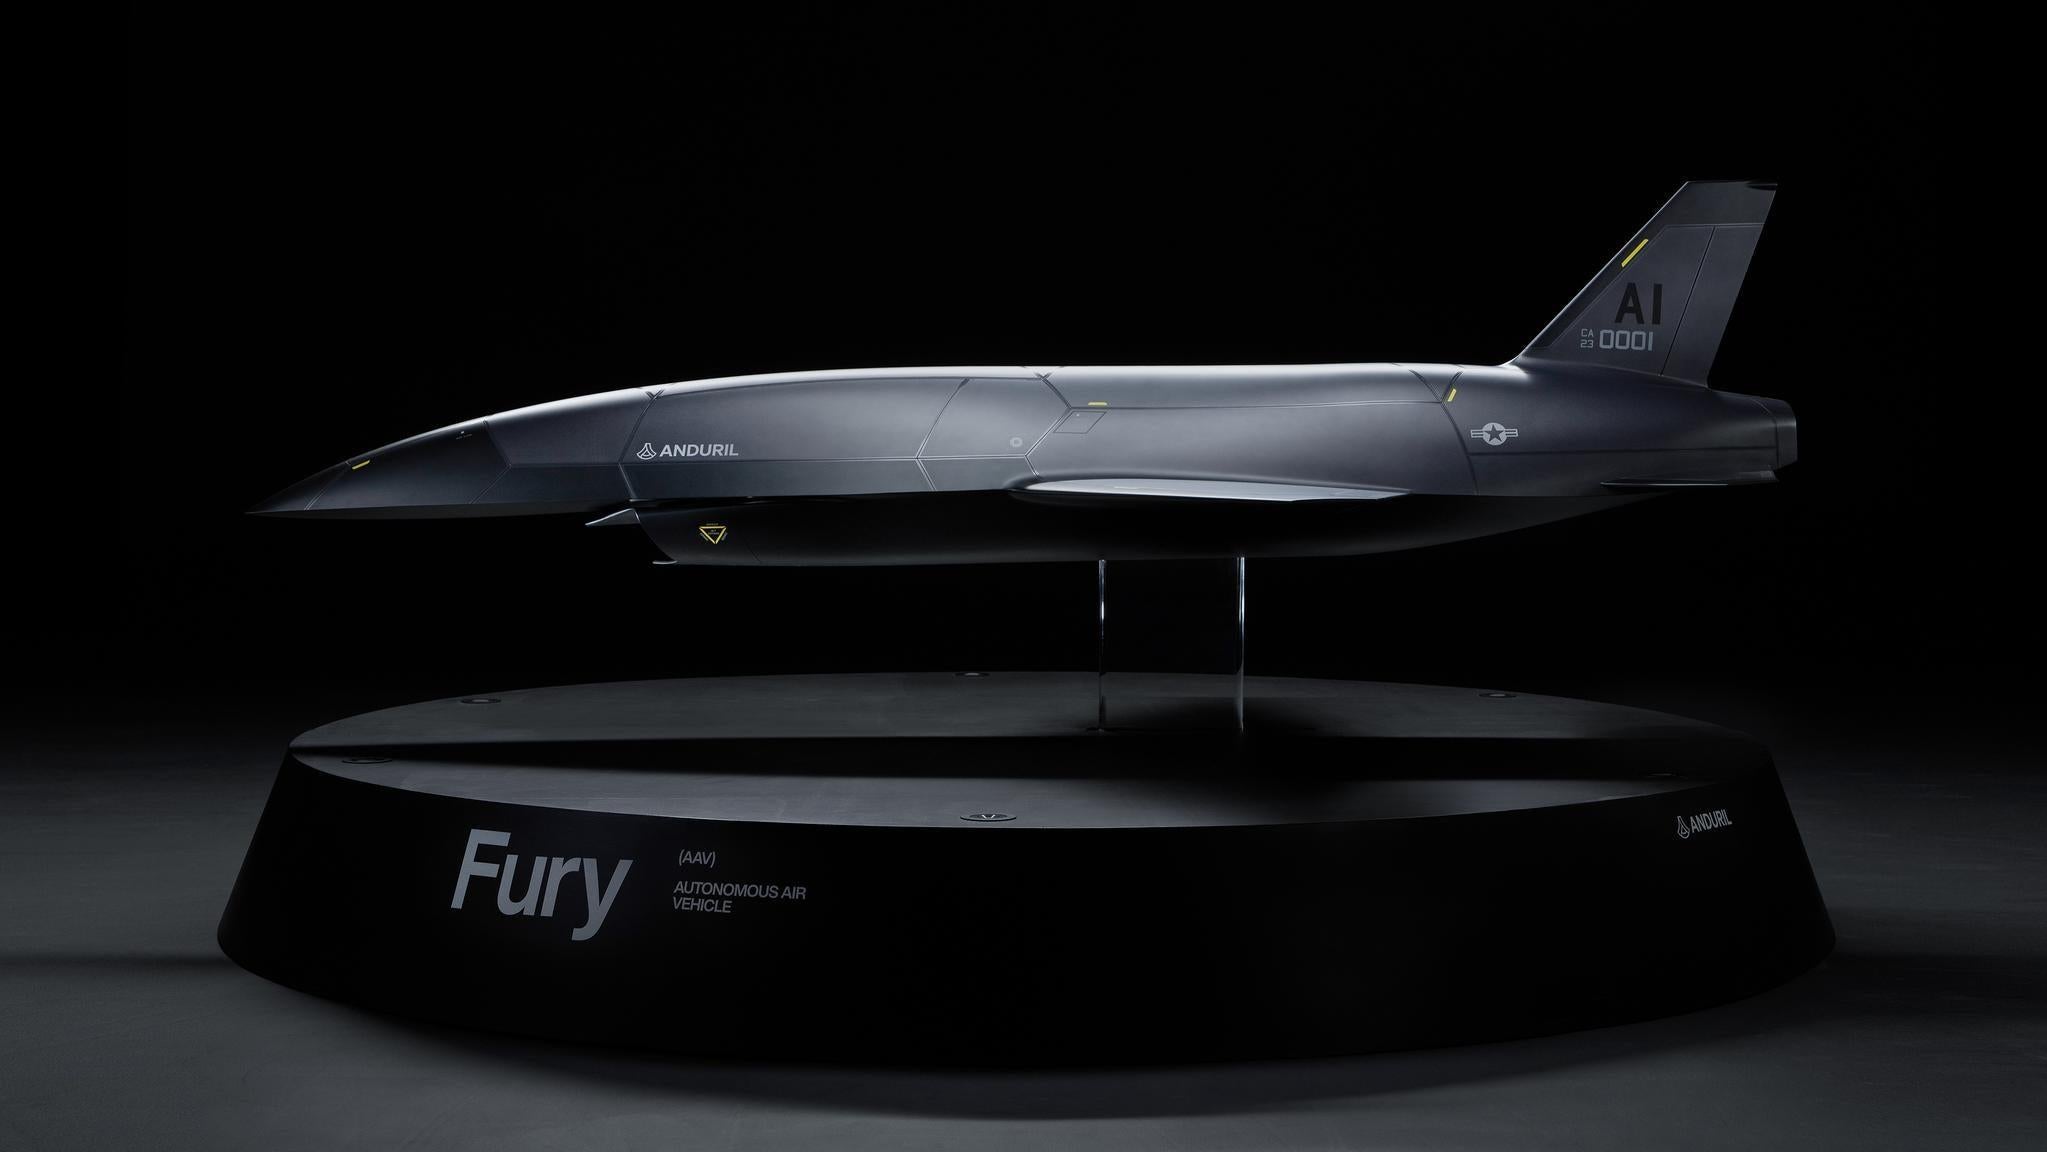 Oculus founder Palmer Luckey’s latest toy is a high-speed autonomous aircraft